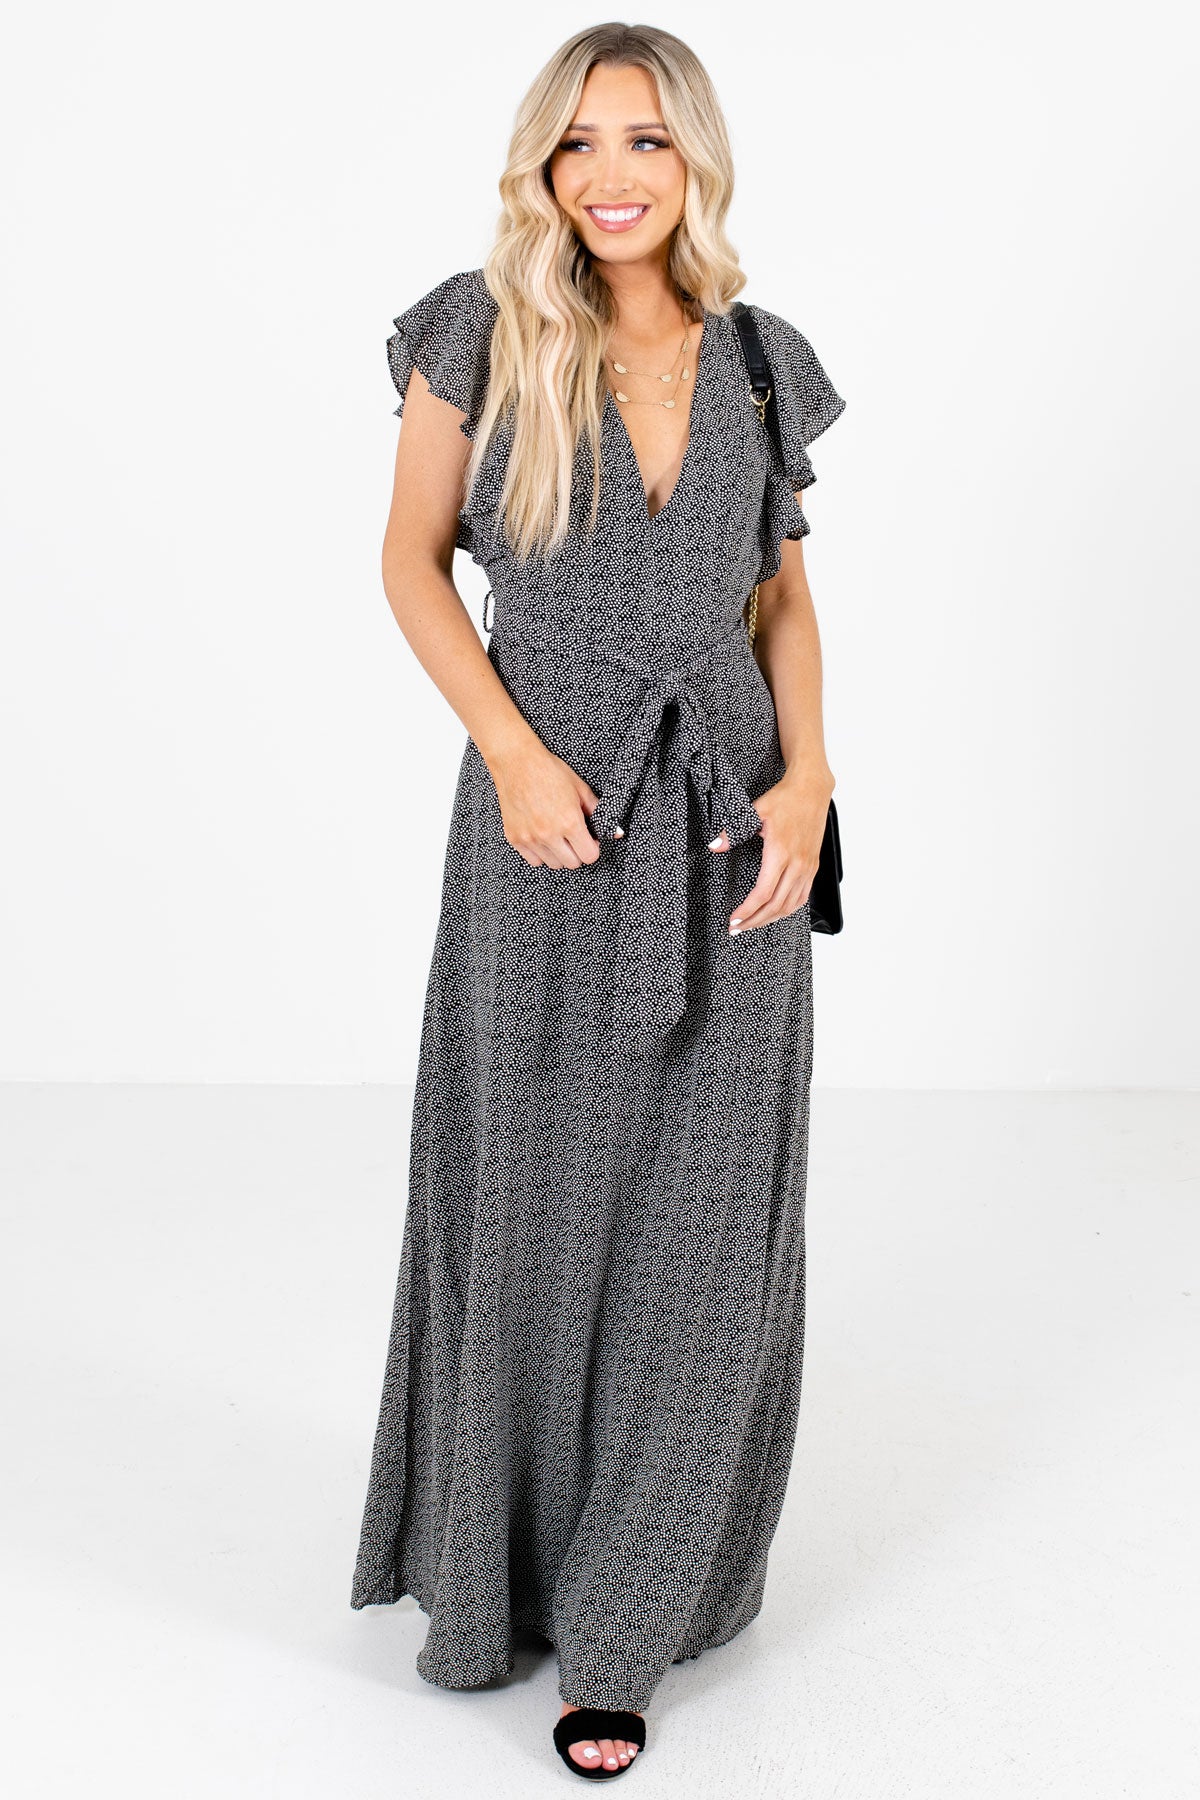 Black Cute and Comfortable Boutique Maxi Dresses for Women